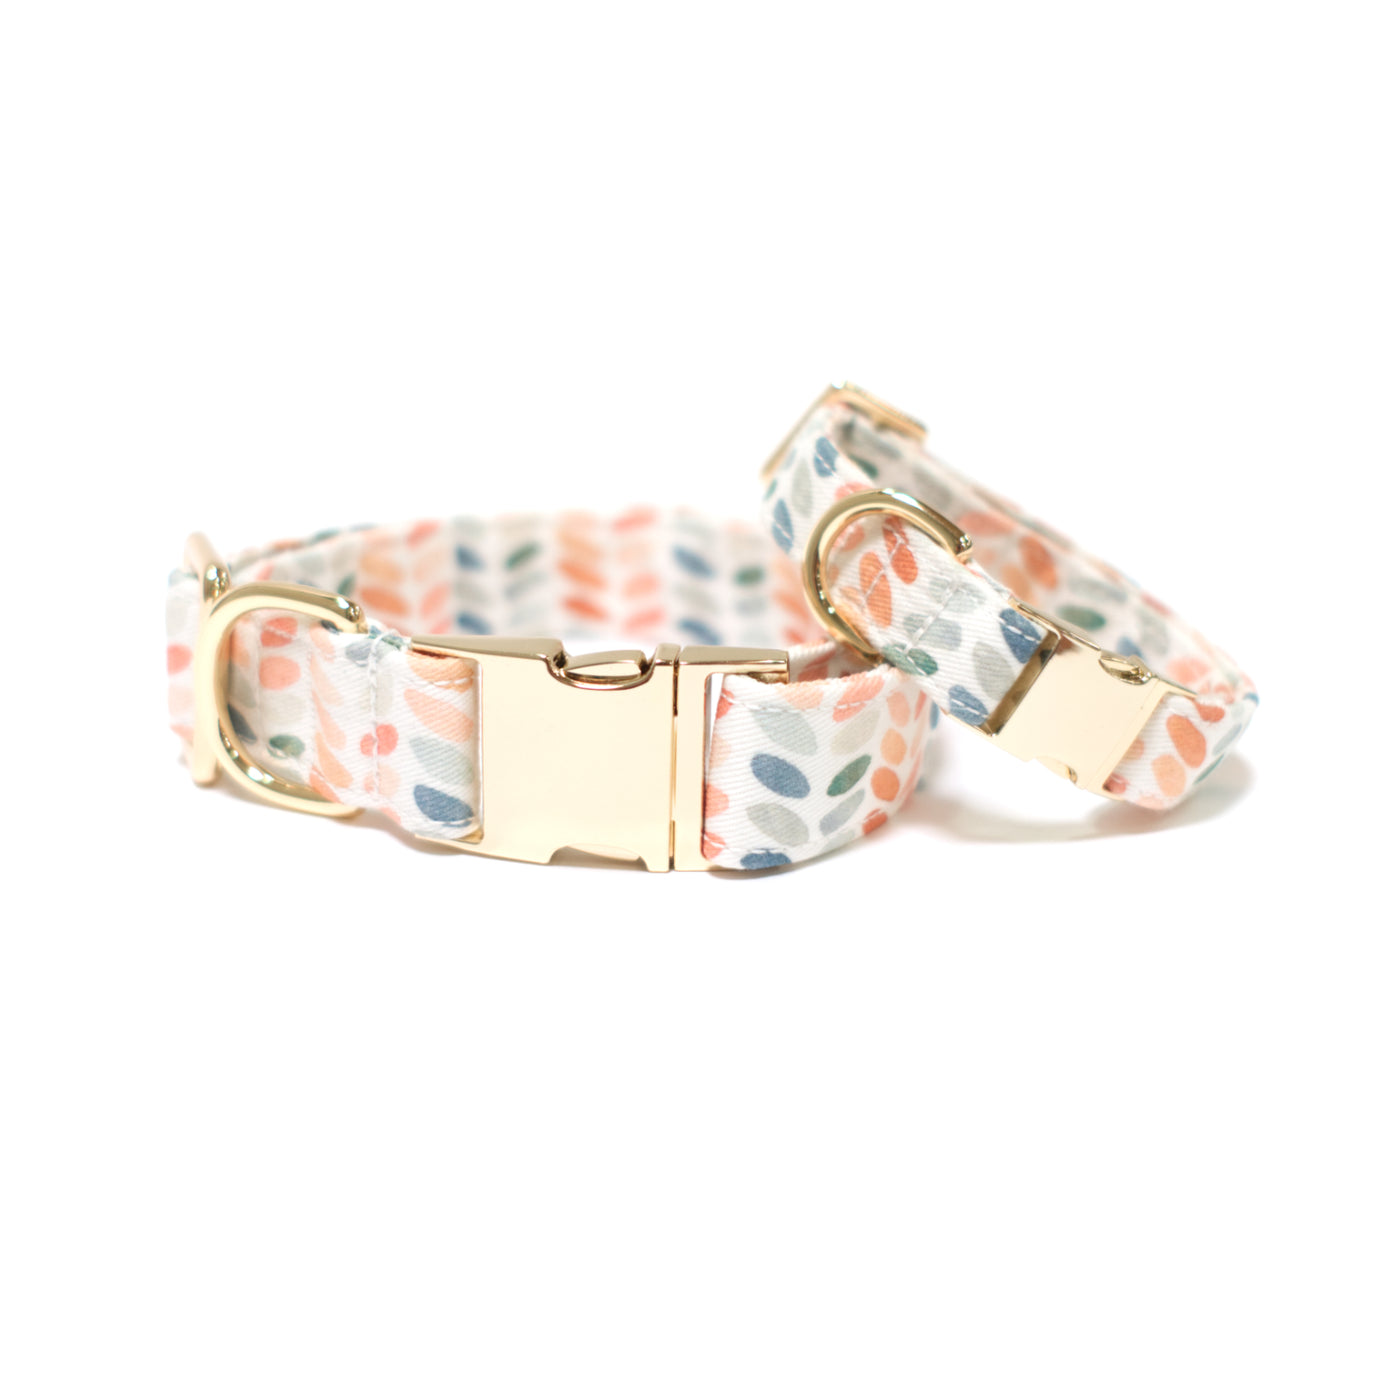 Neutral dot print dog collar with gold hardware